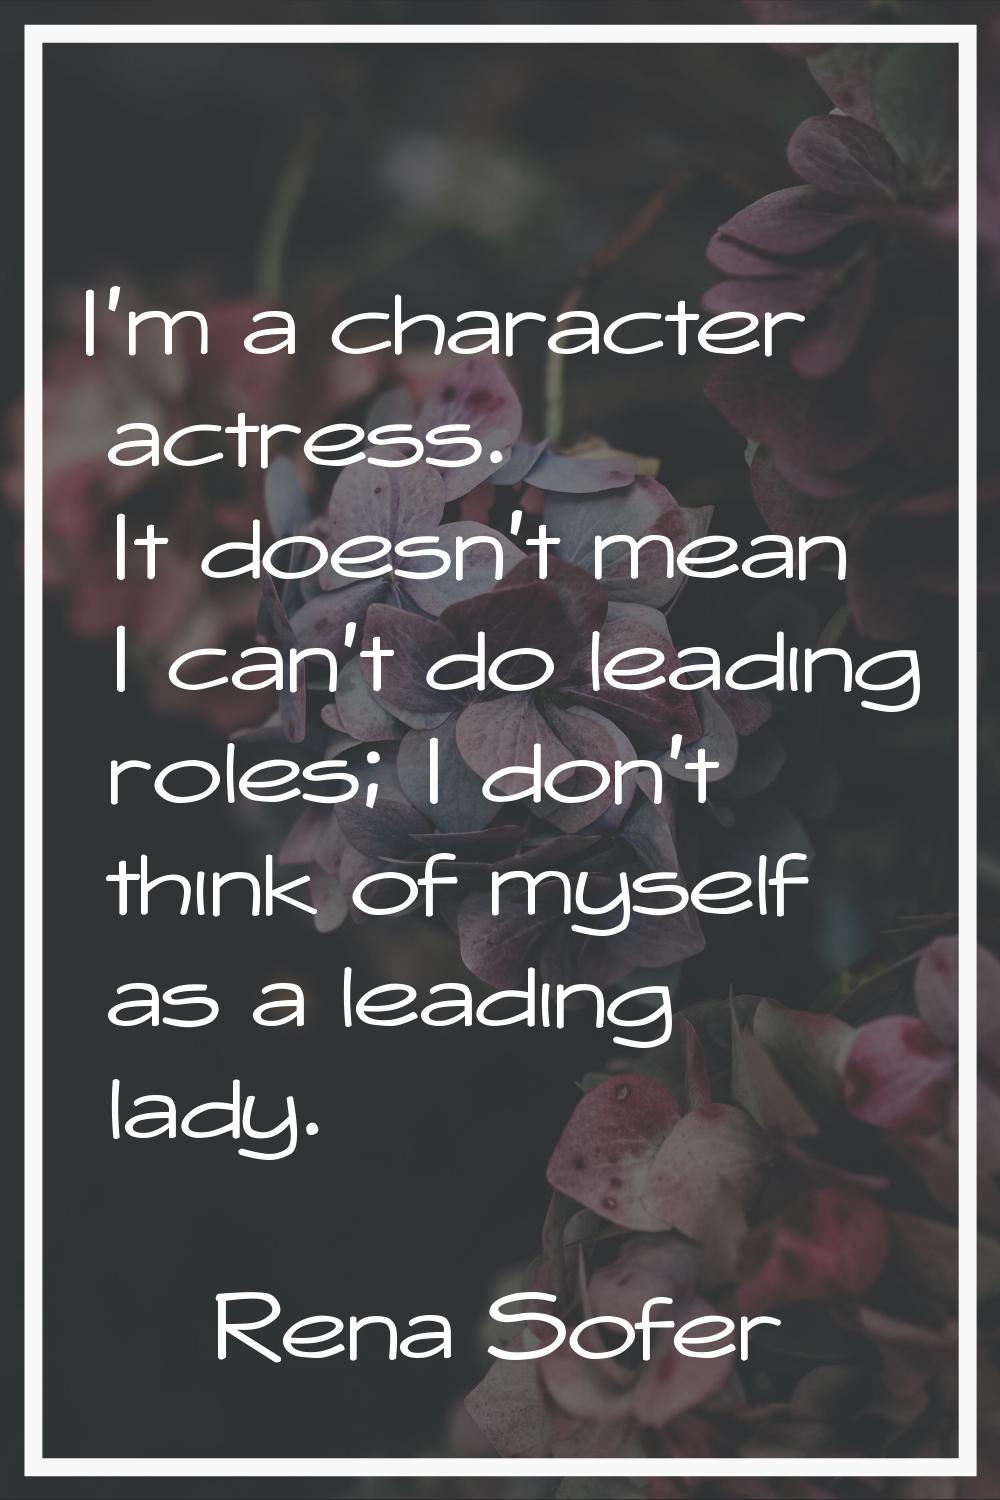 I'm a character actress. It doesn't mean I can't do leading roles; I don't think of myself as a lea